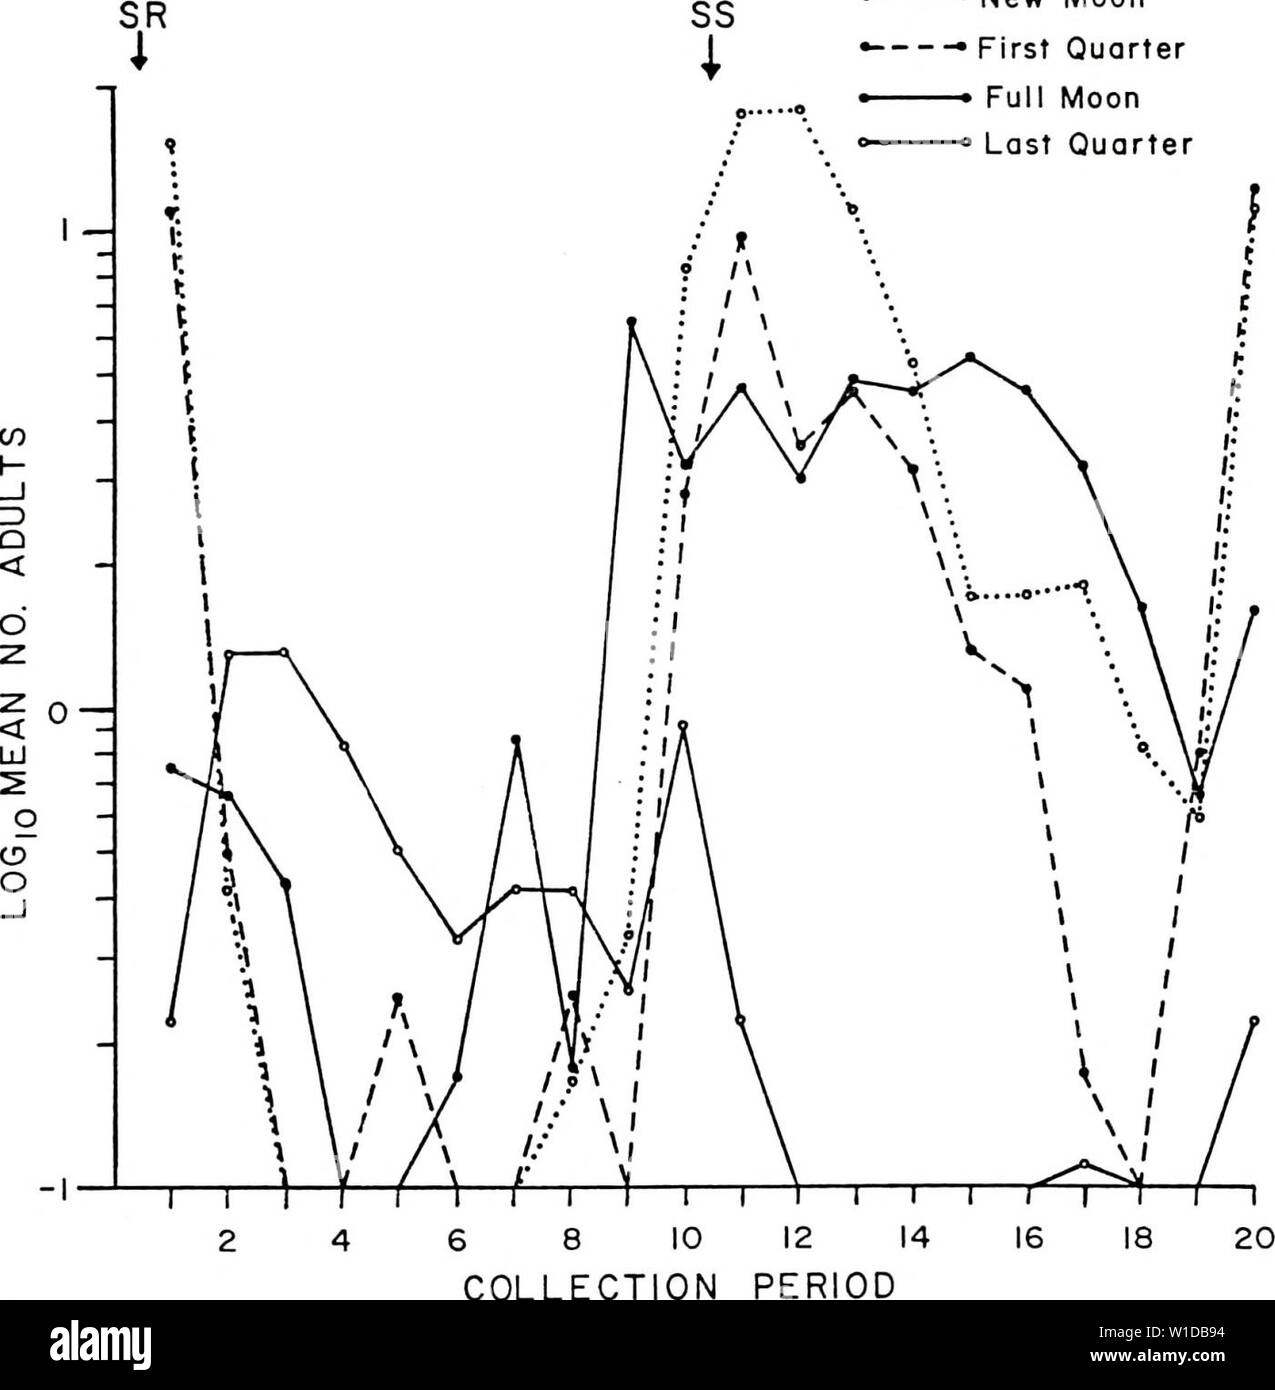 Archive image from page 98 of Diel and seasonal activities of. Diel and seasonal activities of Culicoides spp. Near Yankeetown, Florida . dielseasonalacti00lill Year: 1985  87 New Moon First Quarter Full Moon Last Quarter    6 8 10 COLLECTION Figure 27. Diel periodicity of C. floridensis adults collected in a vehicle-mounted trap on quarter phases of moon. Stock Photo